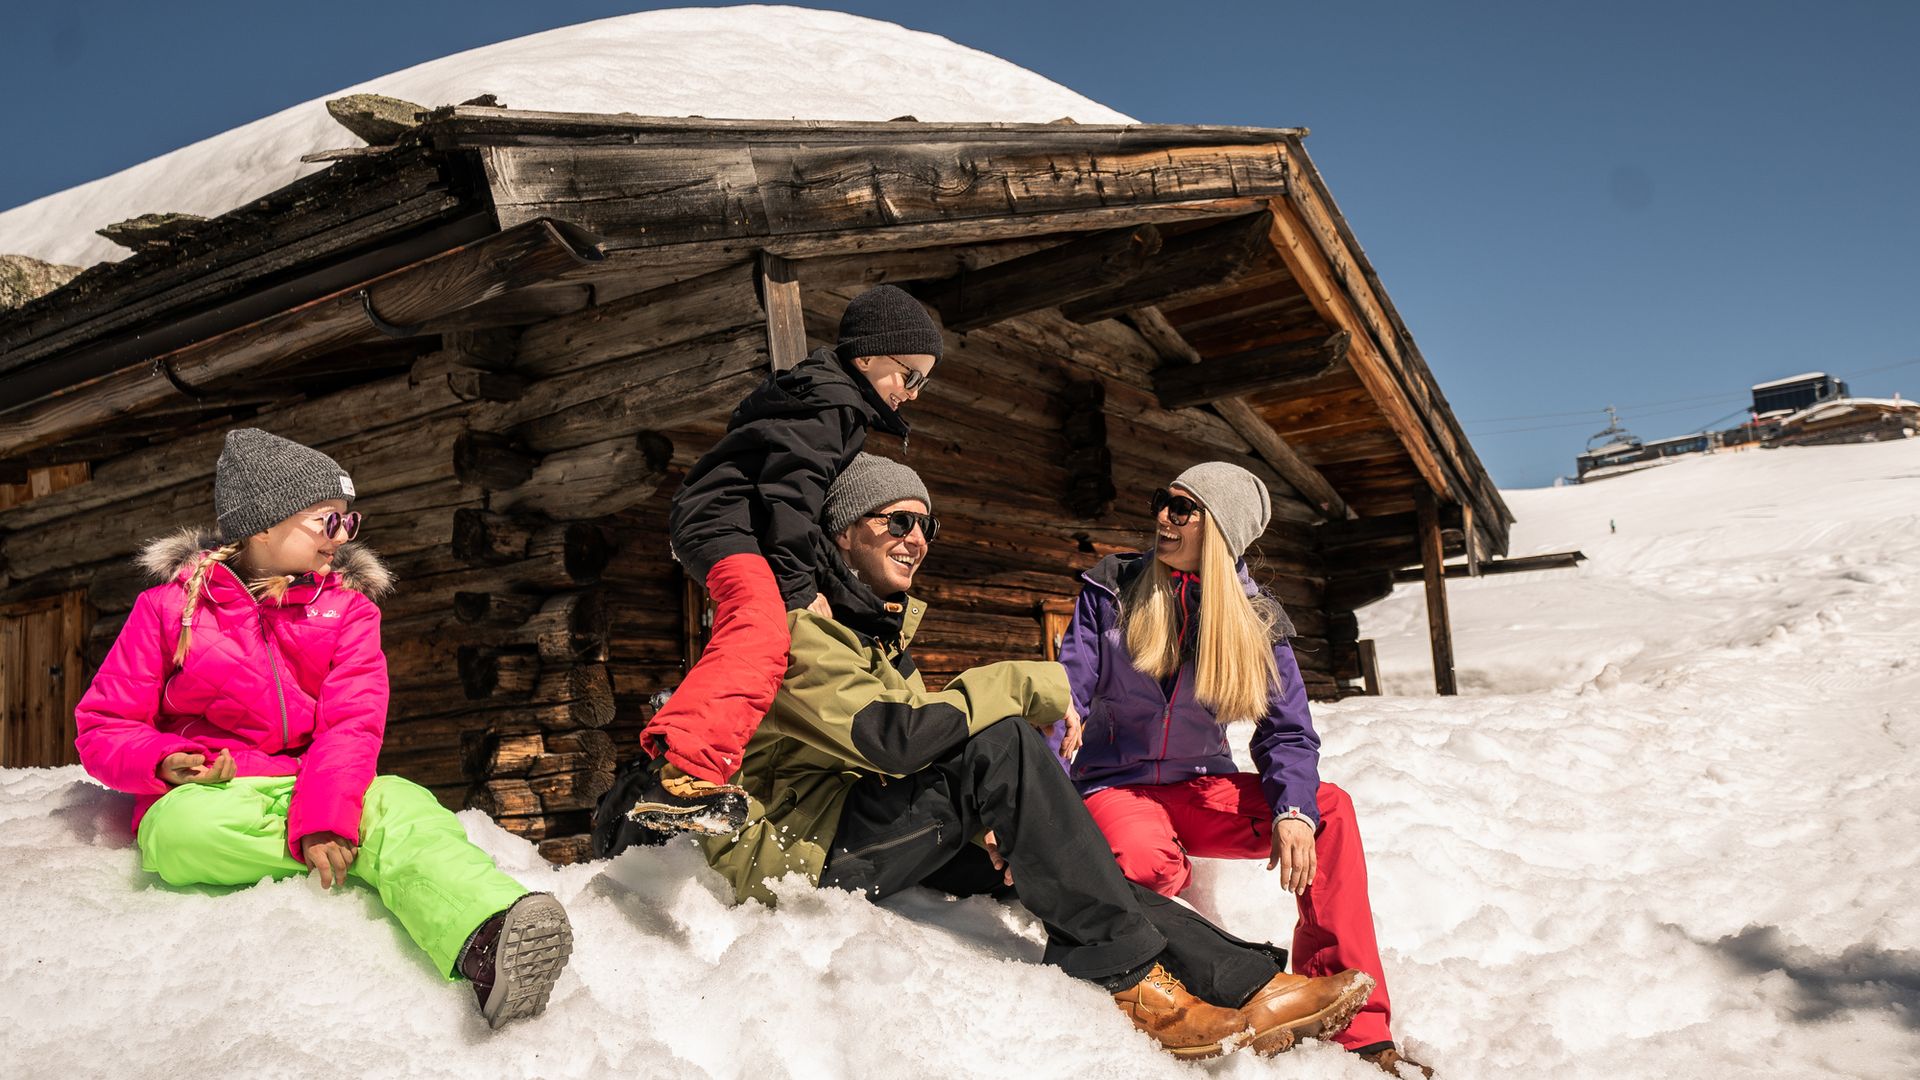 Family in front of a hut in the Ahorn ski area